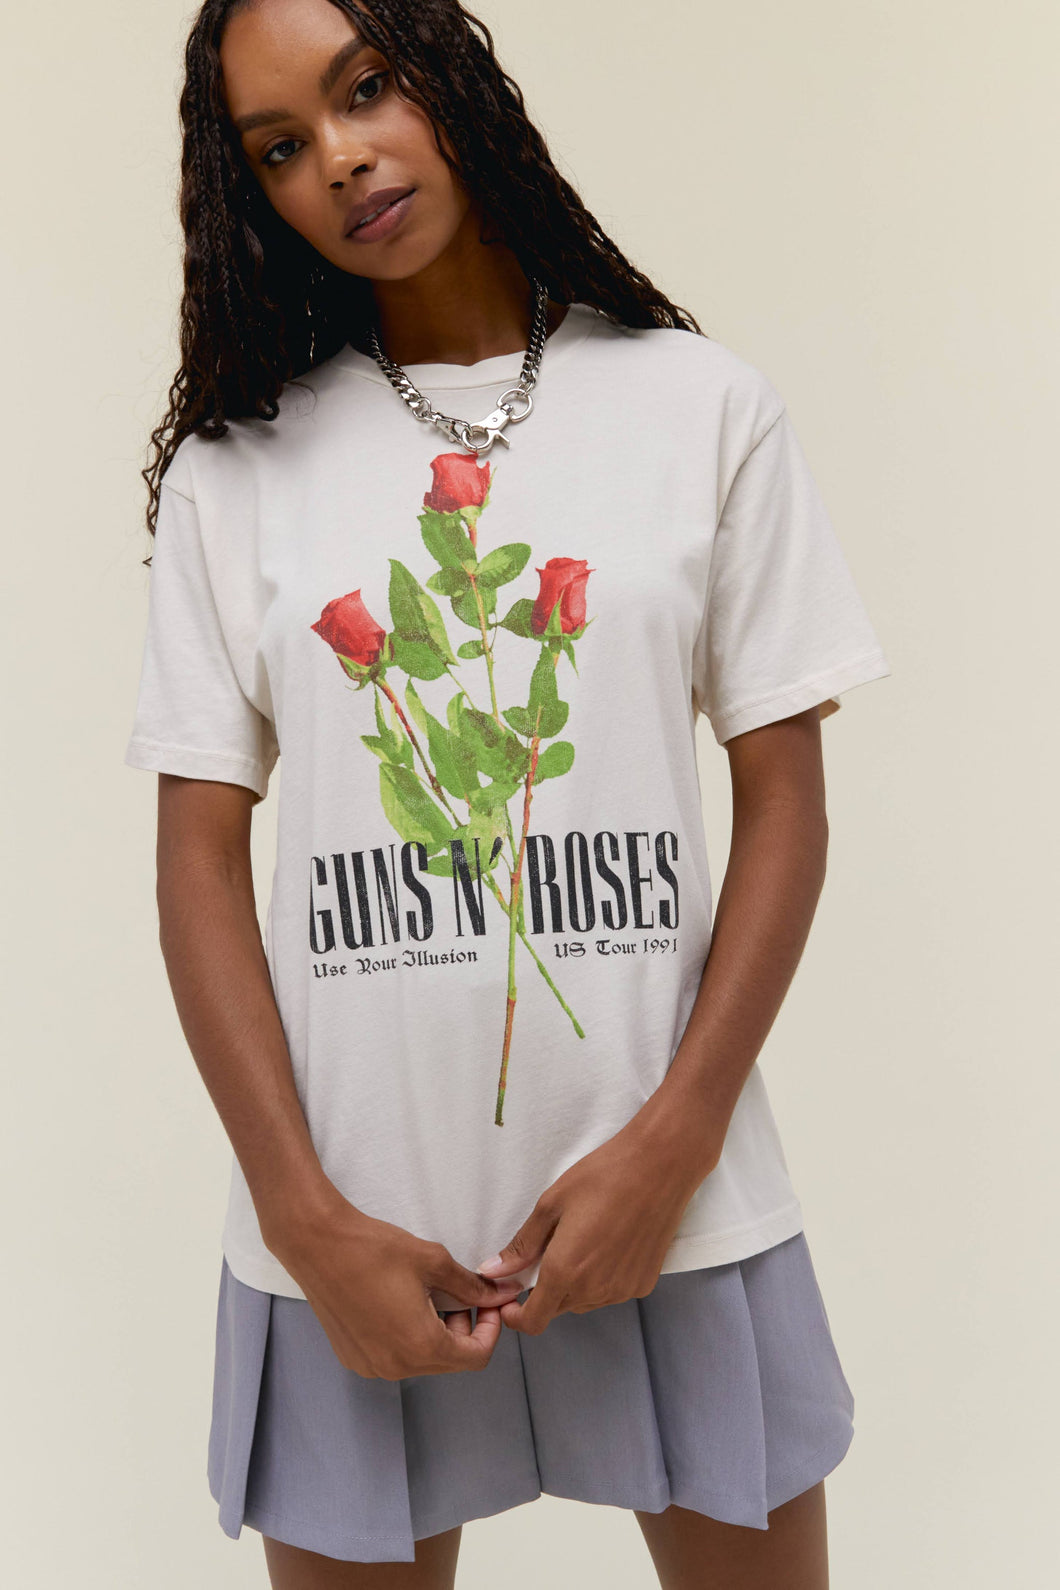 Guns N’ roses Use Your Illusion Roses Weekend Tee